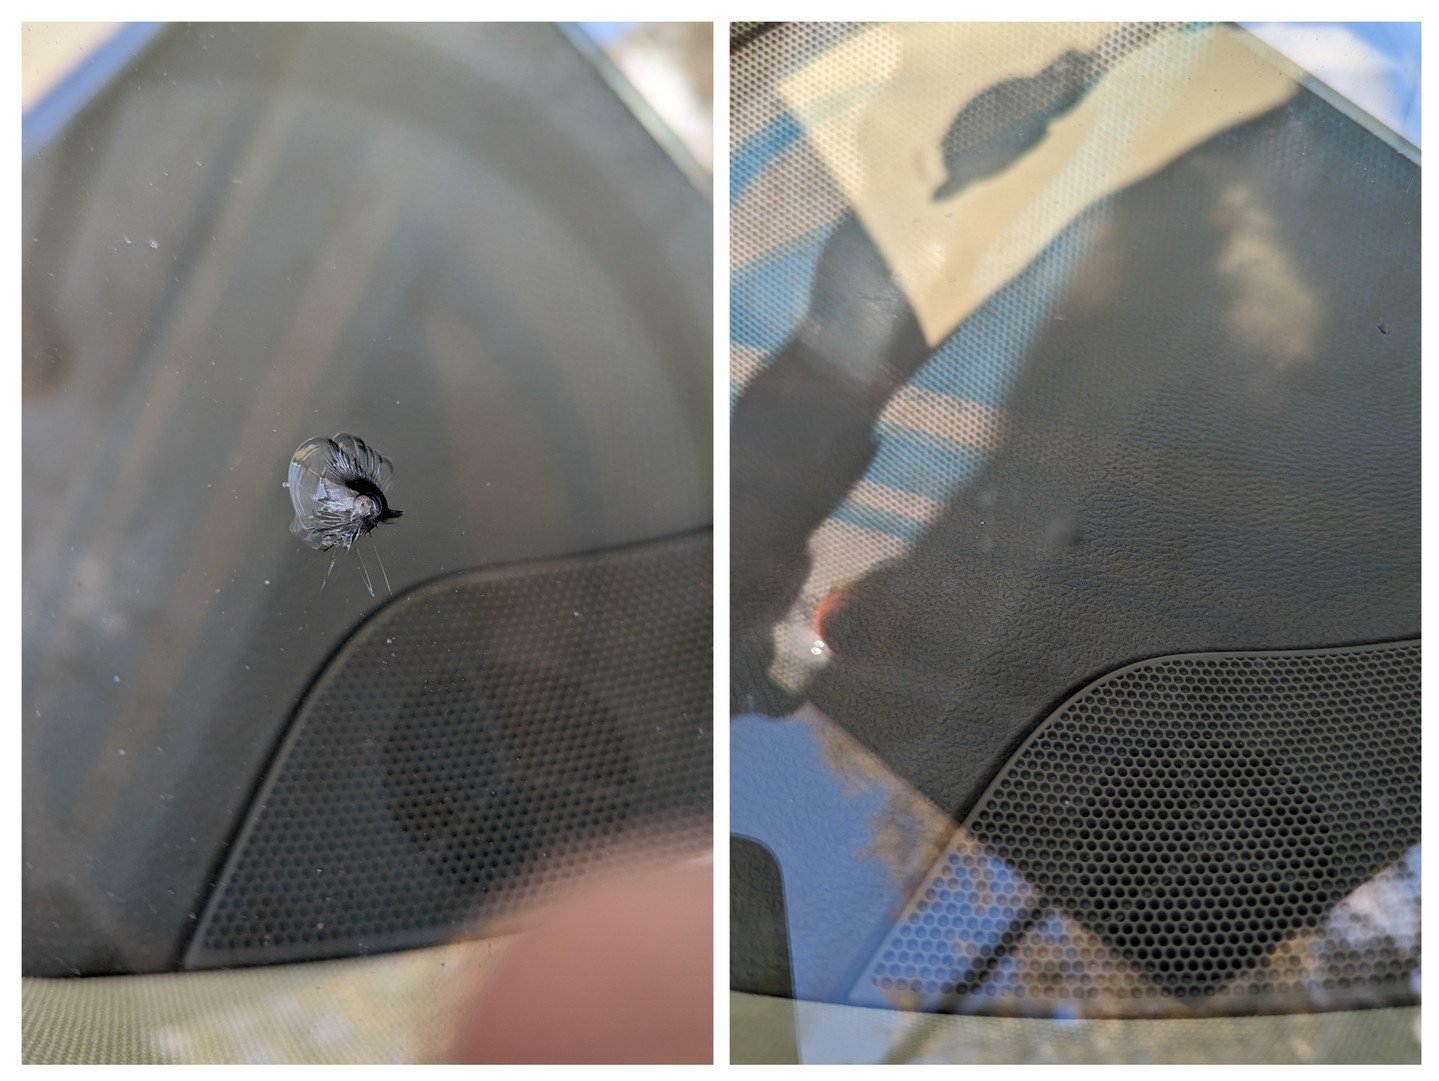 We offer mobile rock chip repair. This is a picture before and after repair. 

We come out to our customers location of choice within our service areas. You could check out our website. Find out more information. Or you can book an appointment online